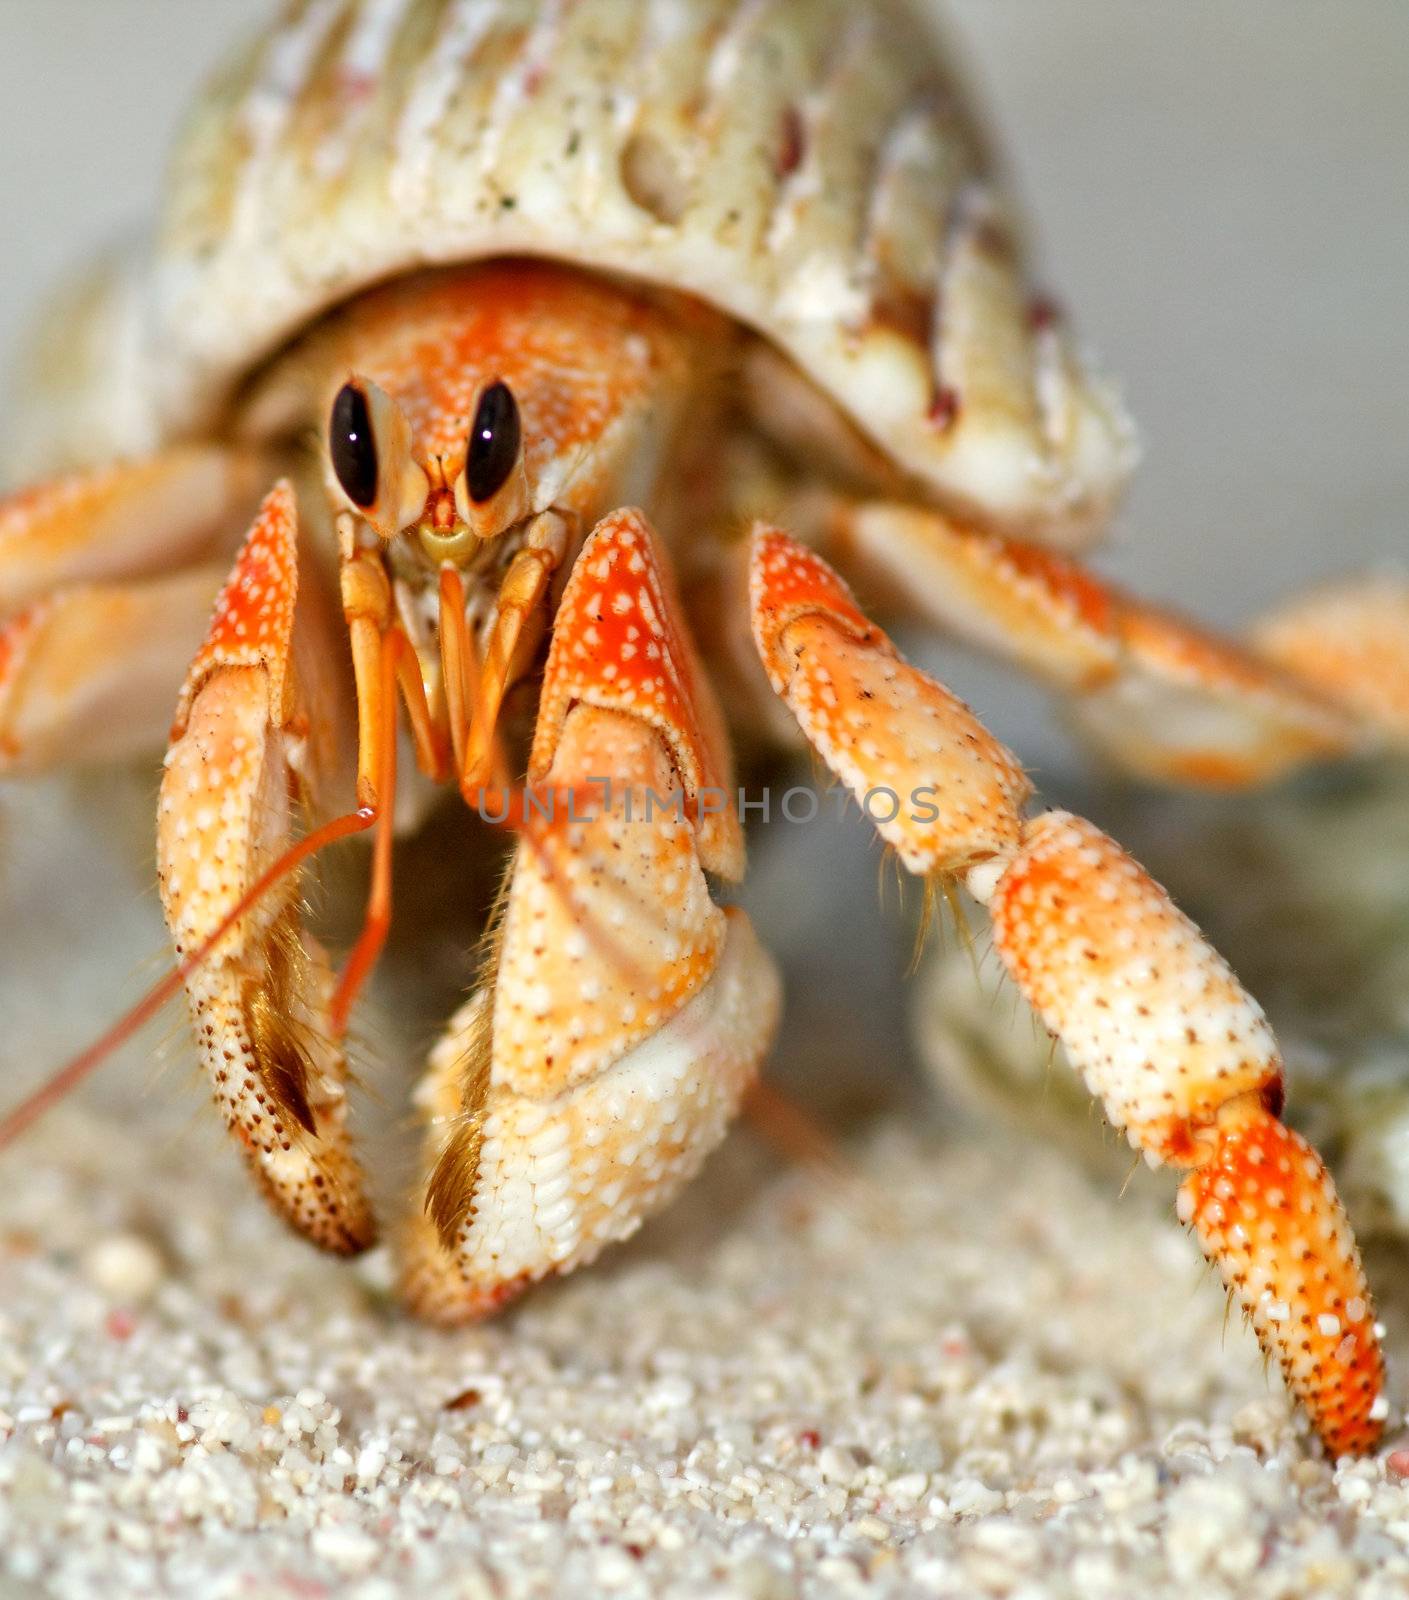 Beautiful hermit crab in his shell close up on sand background